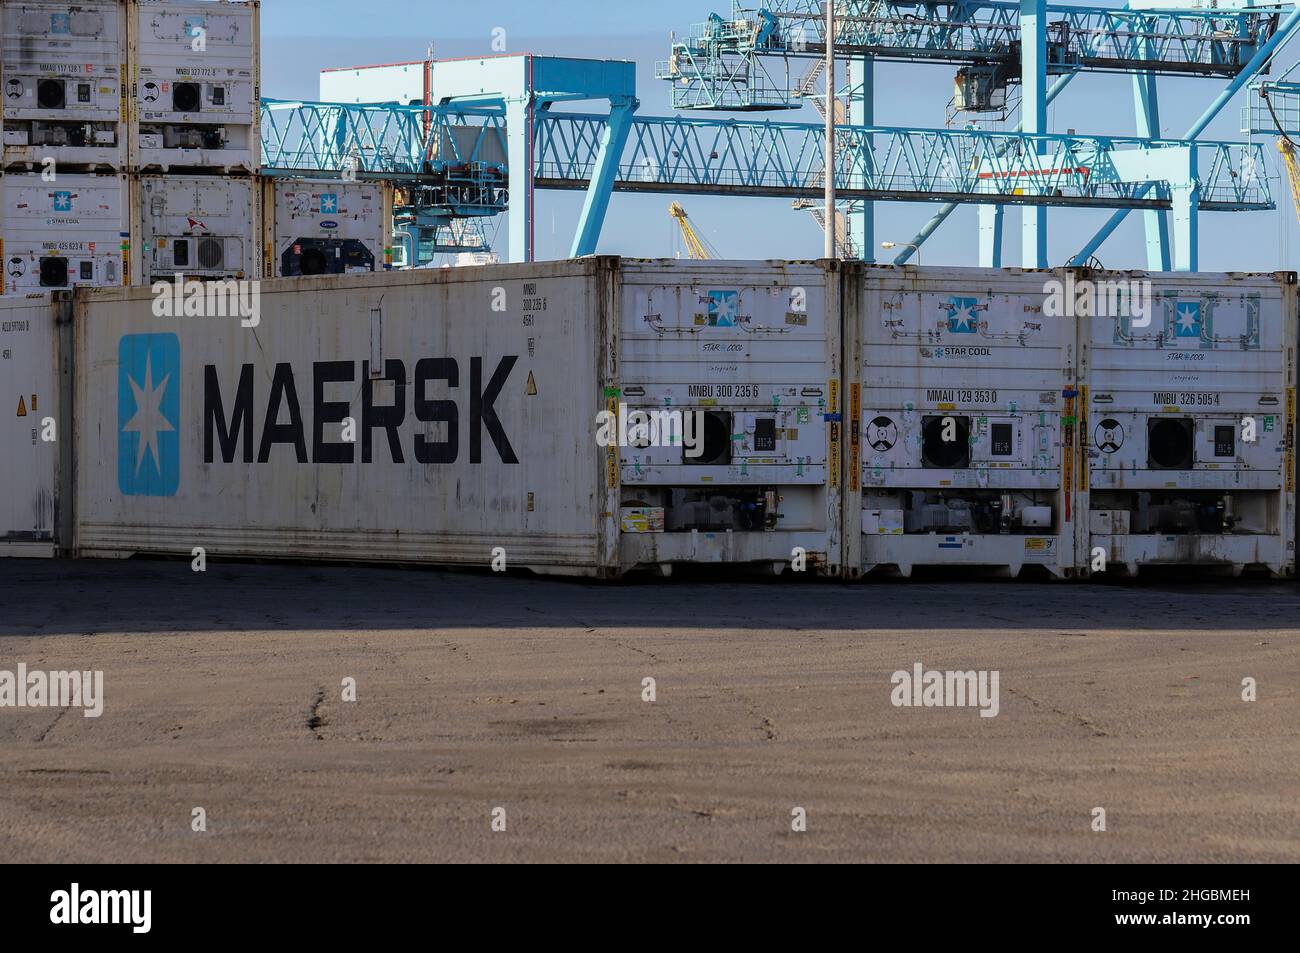 Maersk shipping containers stacked in dock beside gantry crane. White refrigerated crates used to transport or ship chilled goods or freight. Ireland Stock Photo